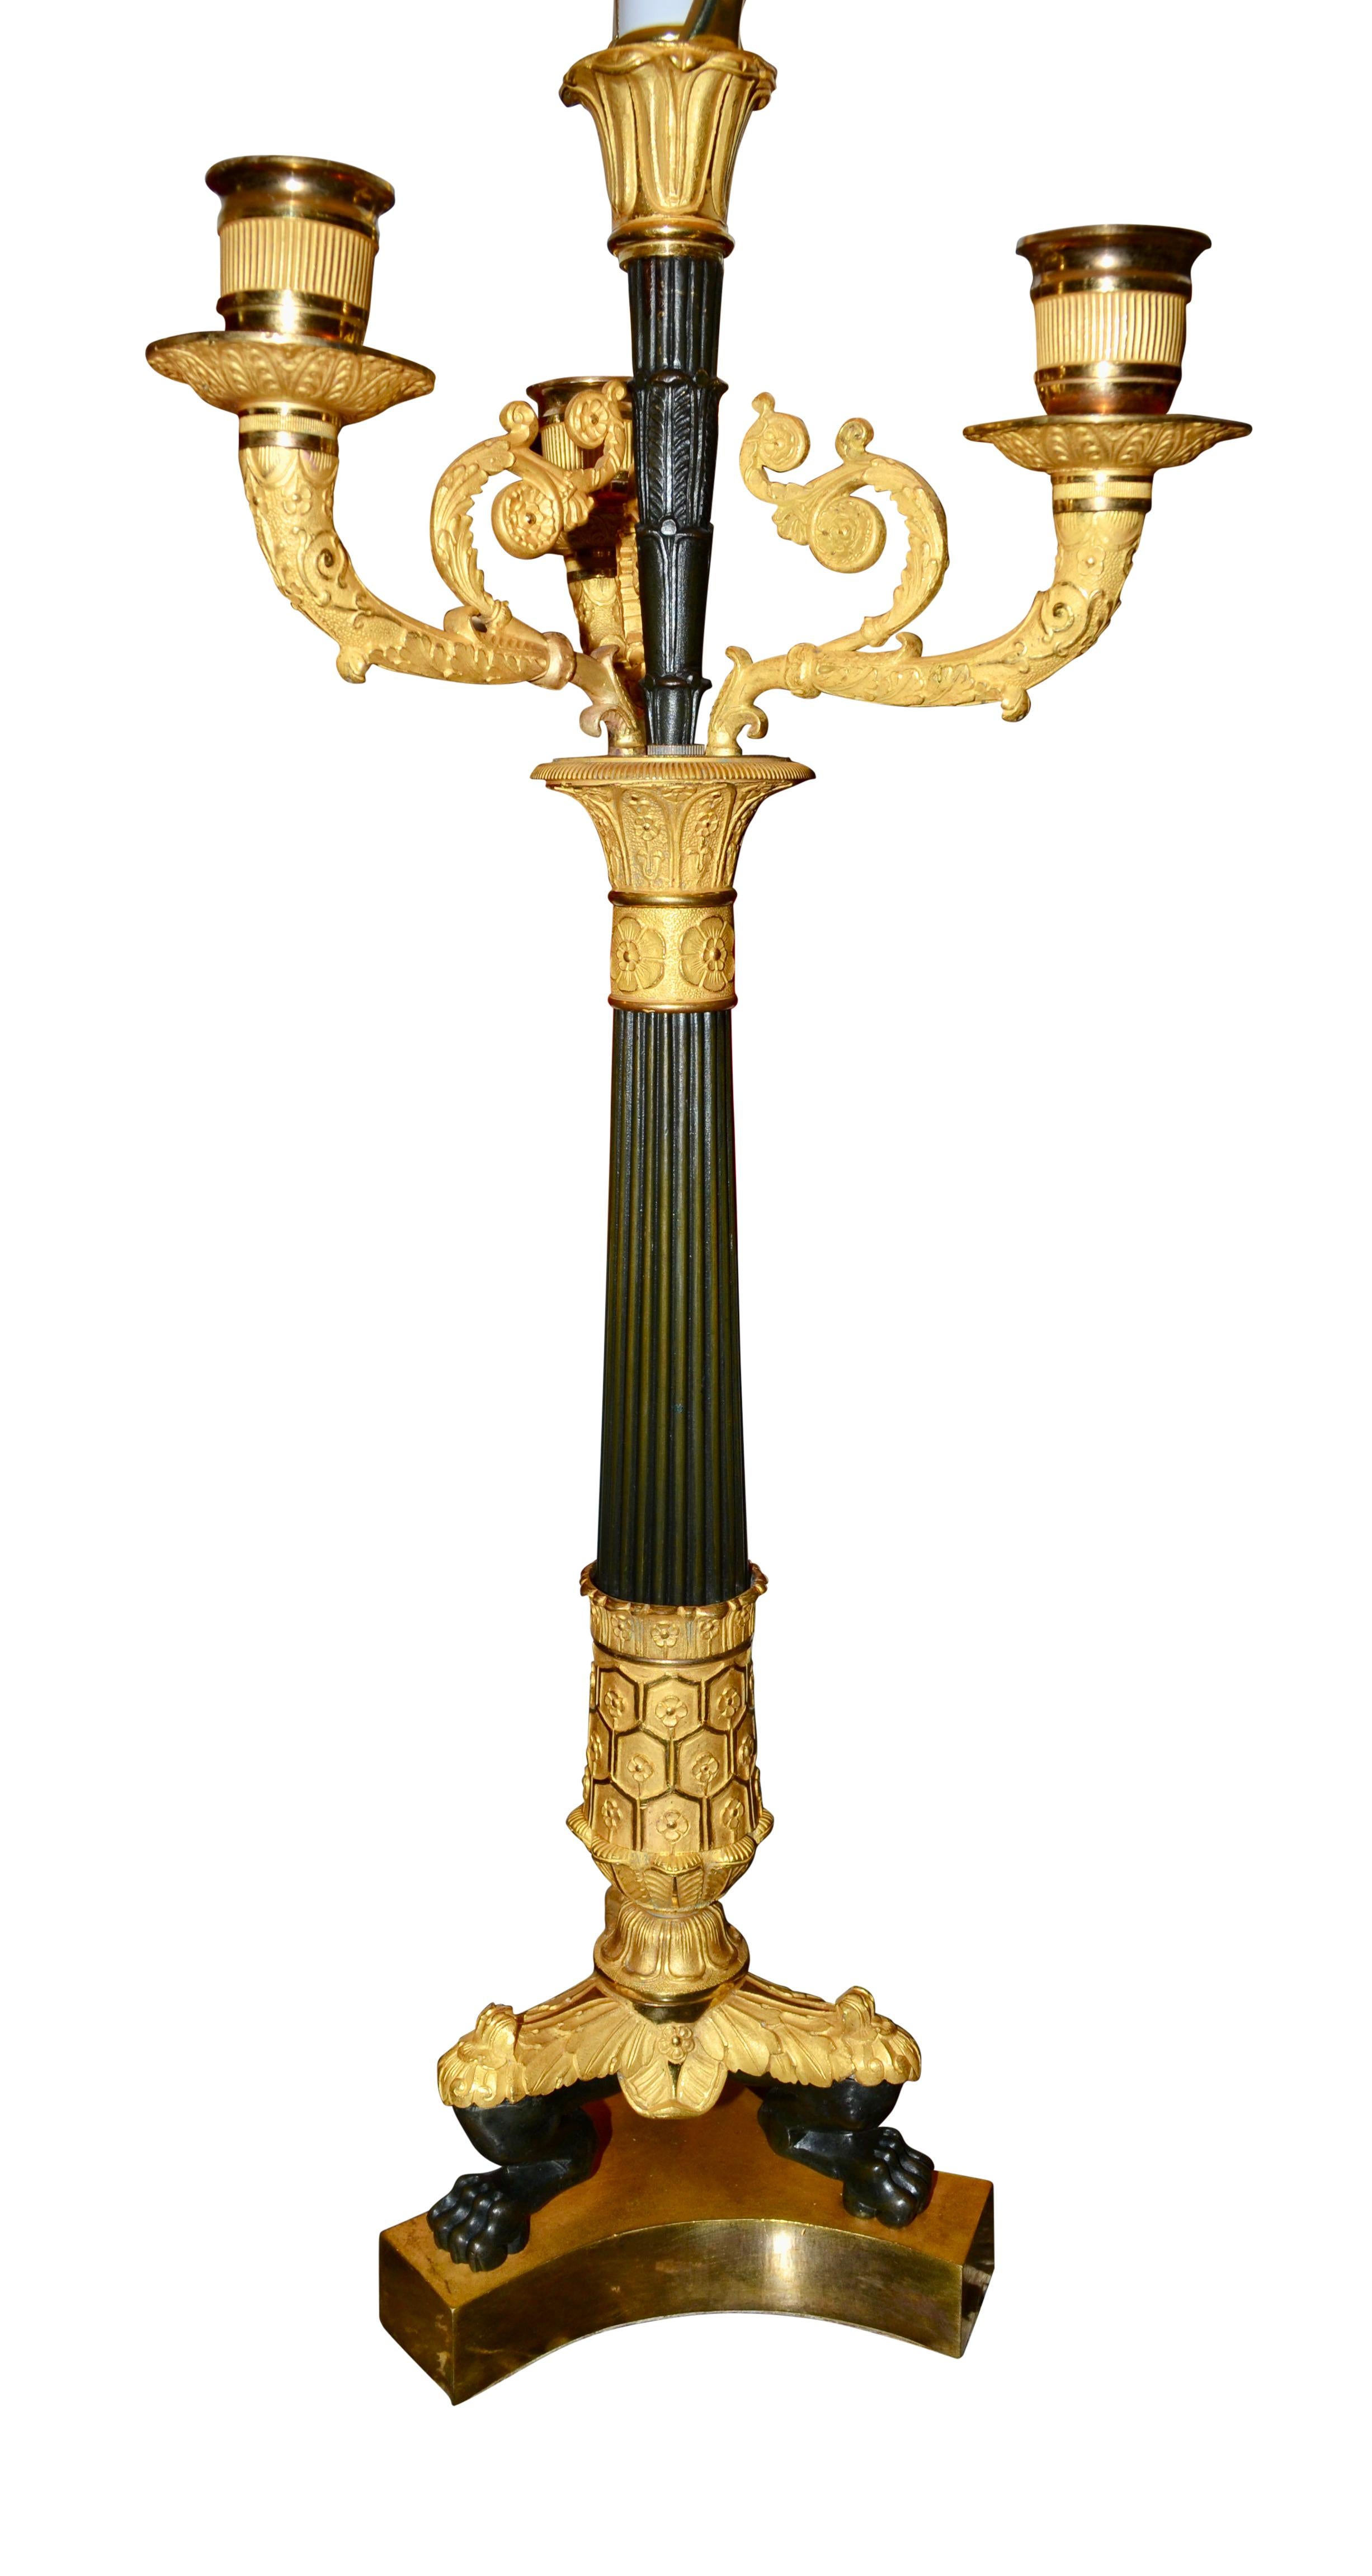 A finely chased and gilded period French Empire candlestick that has been electrified. The triform gilded bottom supports three patinated lions paw feet with gilded tops which connect to a patinated and gilded bronze central stem, the top of which